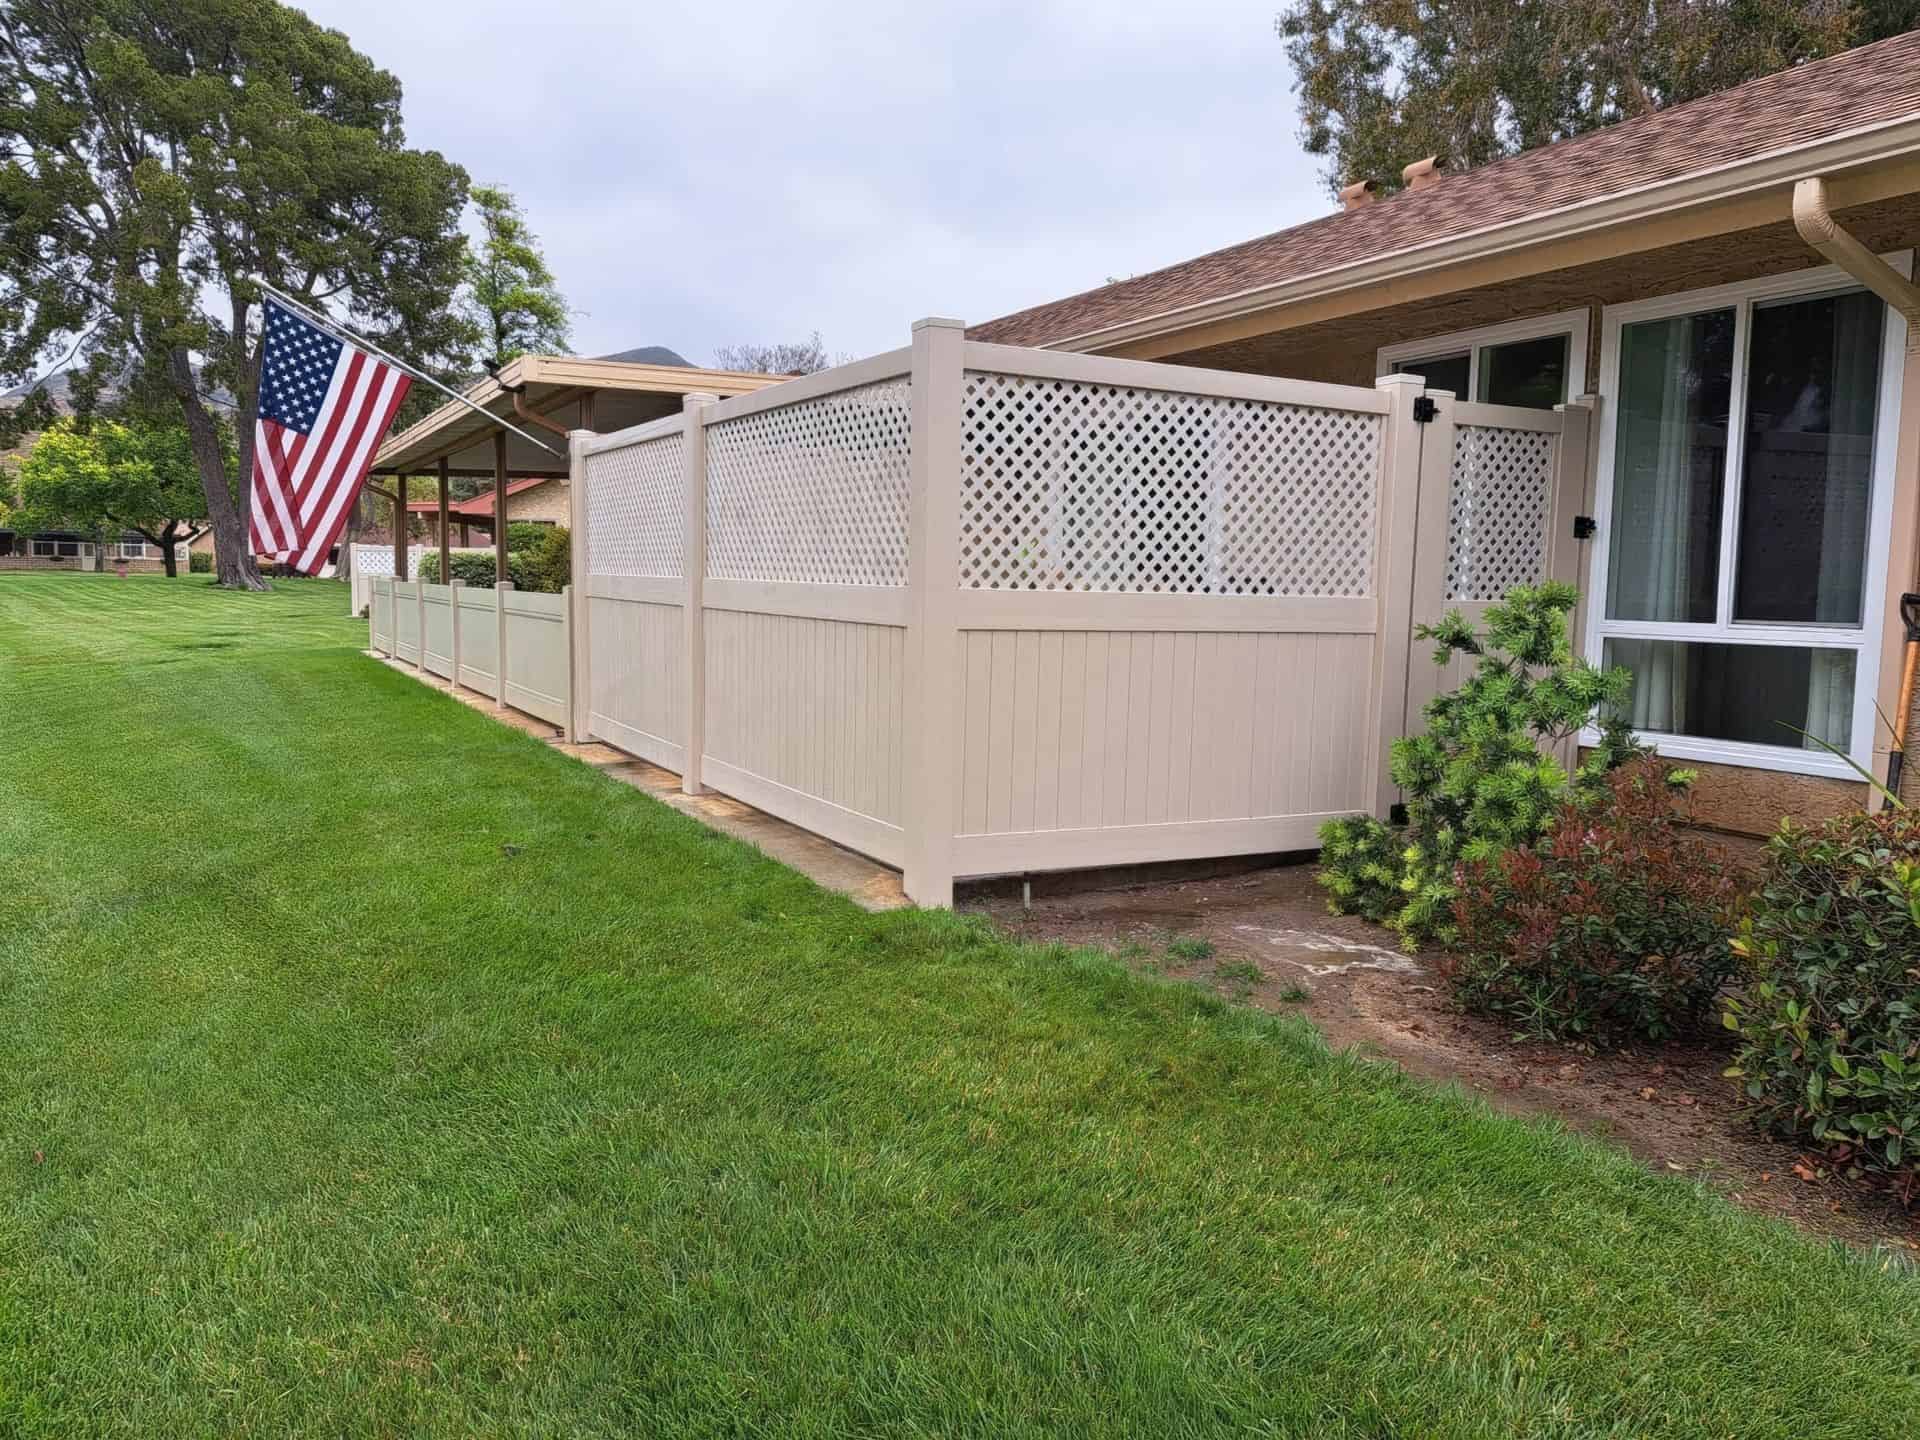 Vinyl lattice fence with garden behind it visually separates the driveway from the house, its lawn, and small garden.